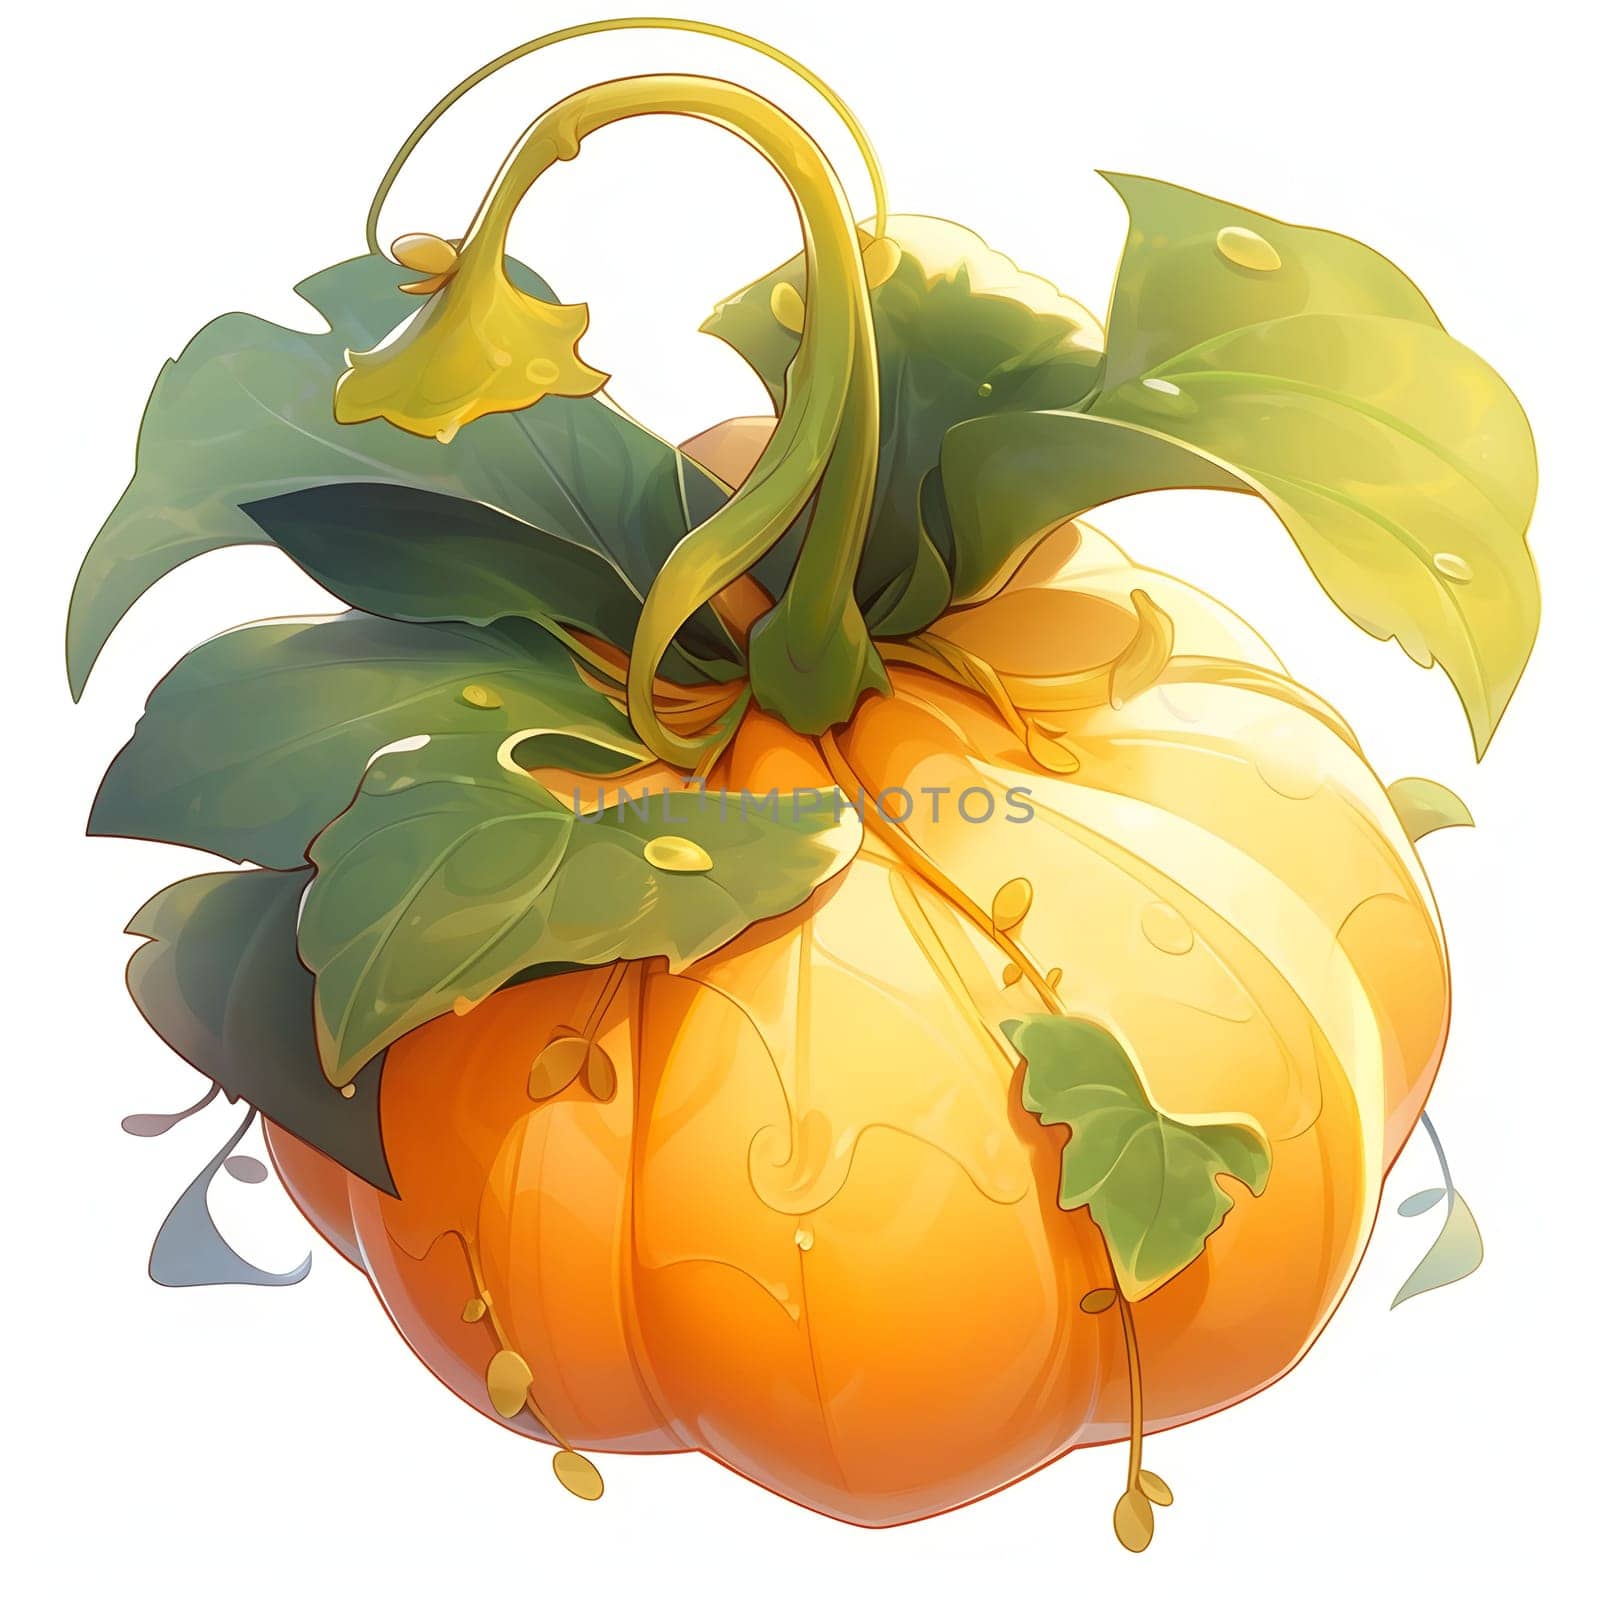 Fairy tale illustration of a pumpkin with leaves on a white background. Pumpkin as a dish of thanksgiving for the harvest. An atmosphere of joy and celebration.